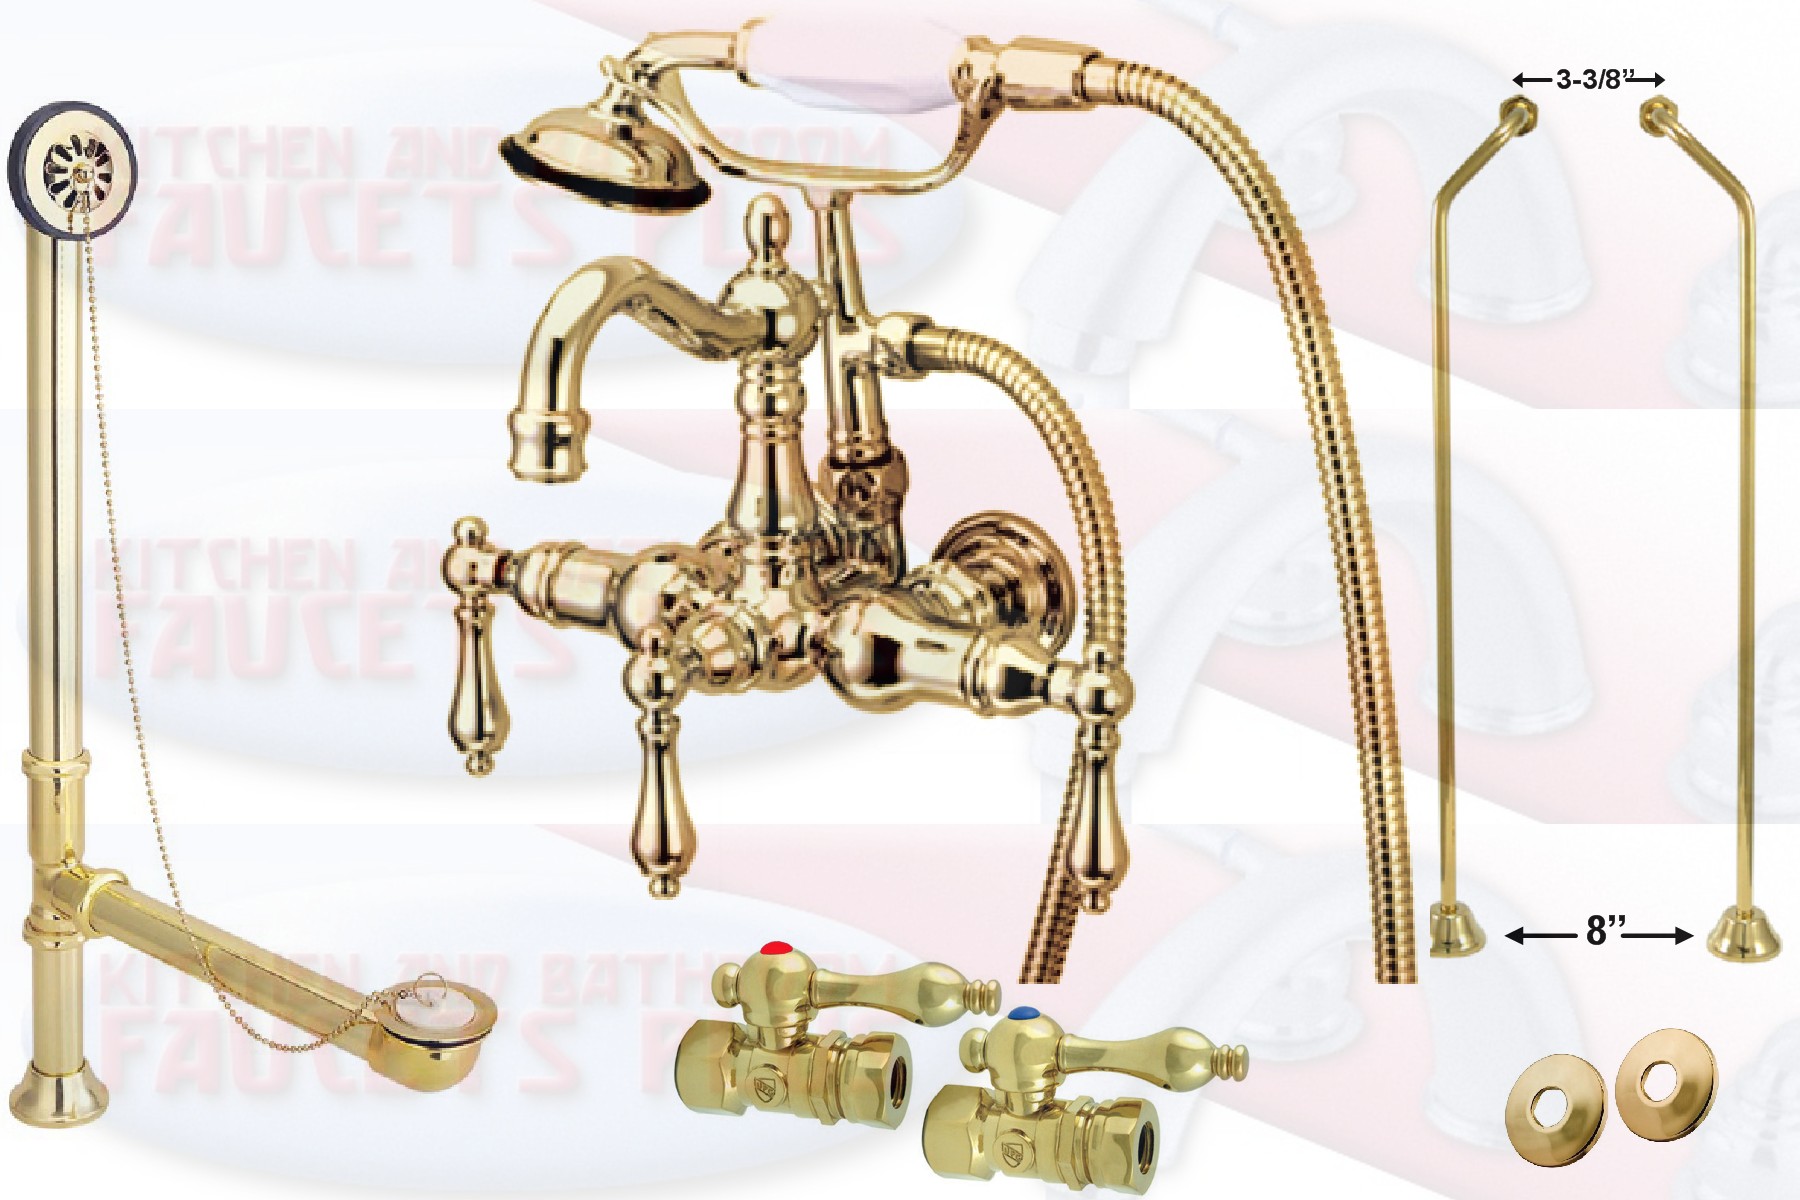 Polished Brass Clawfoot Tub Faucet Kit Including Drain Supplies Foor Stops